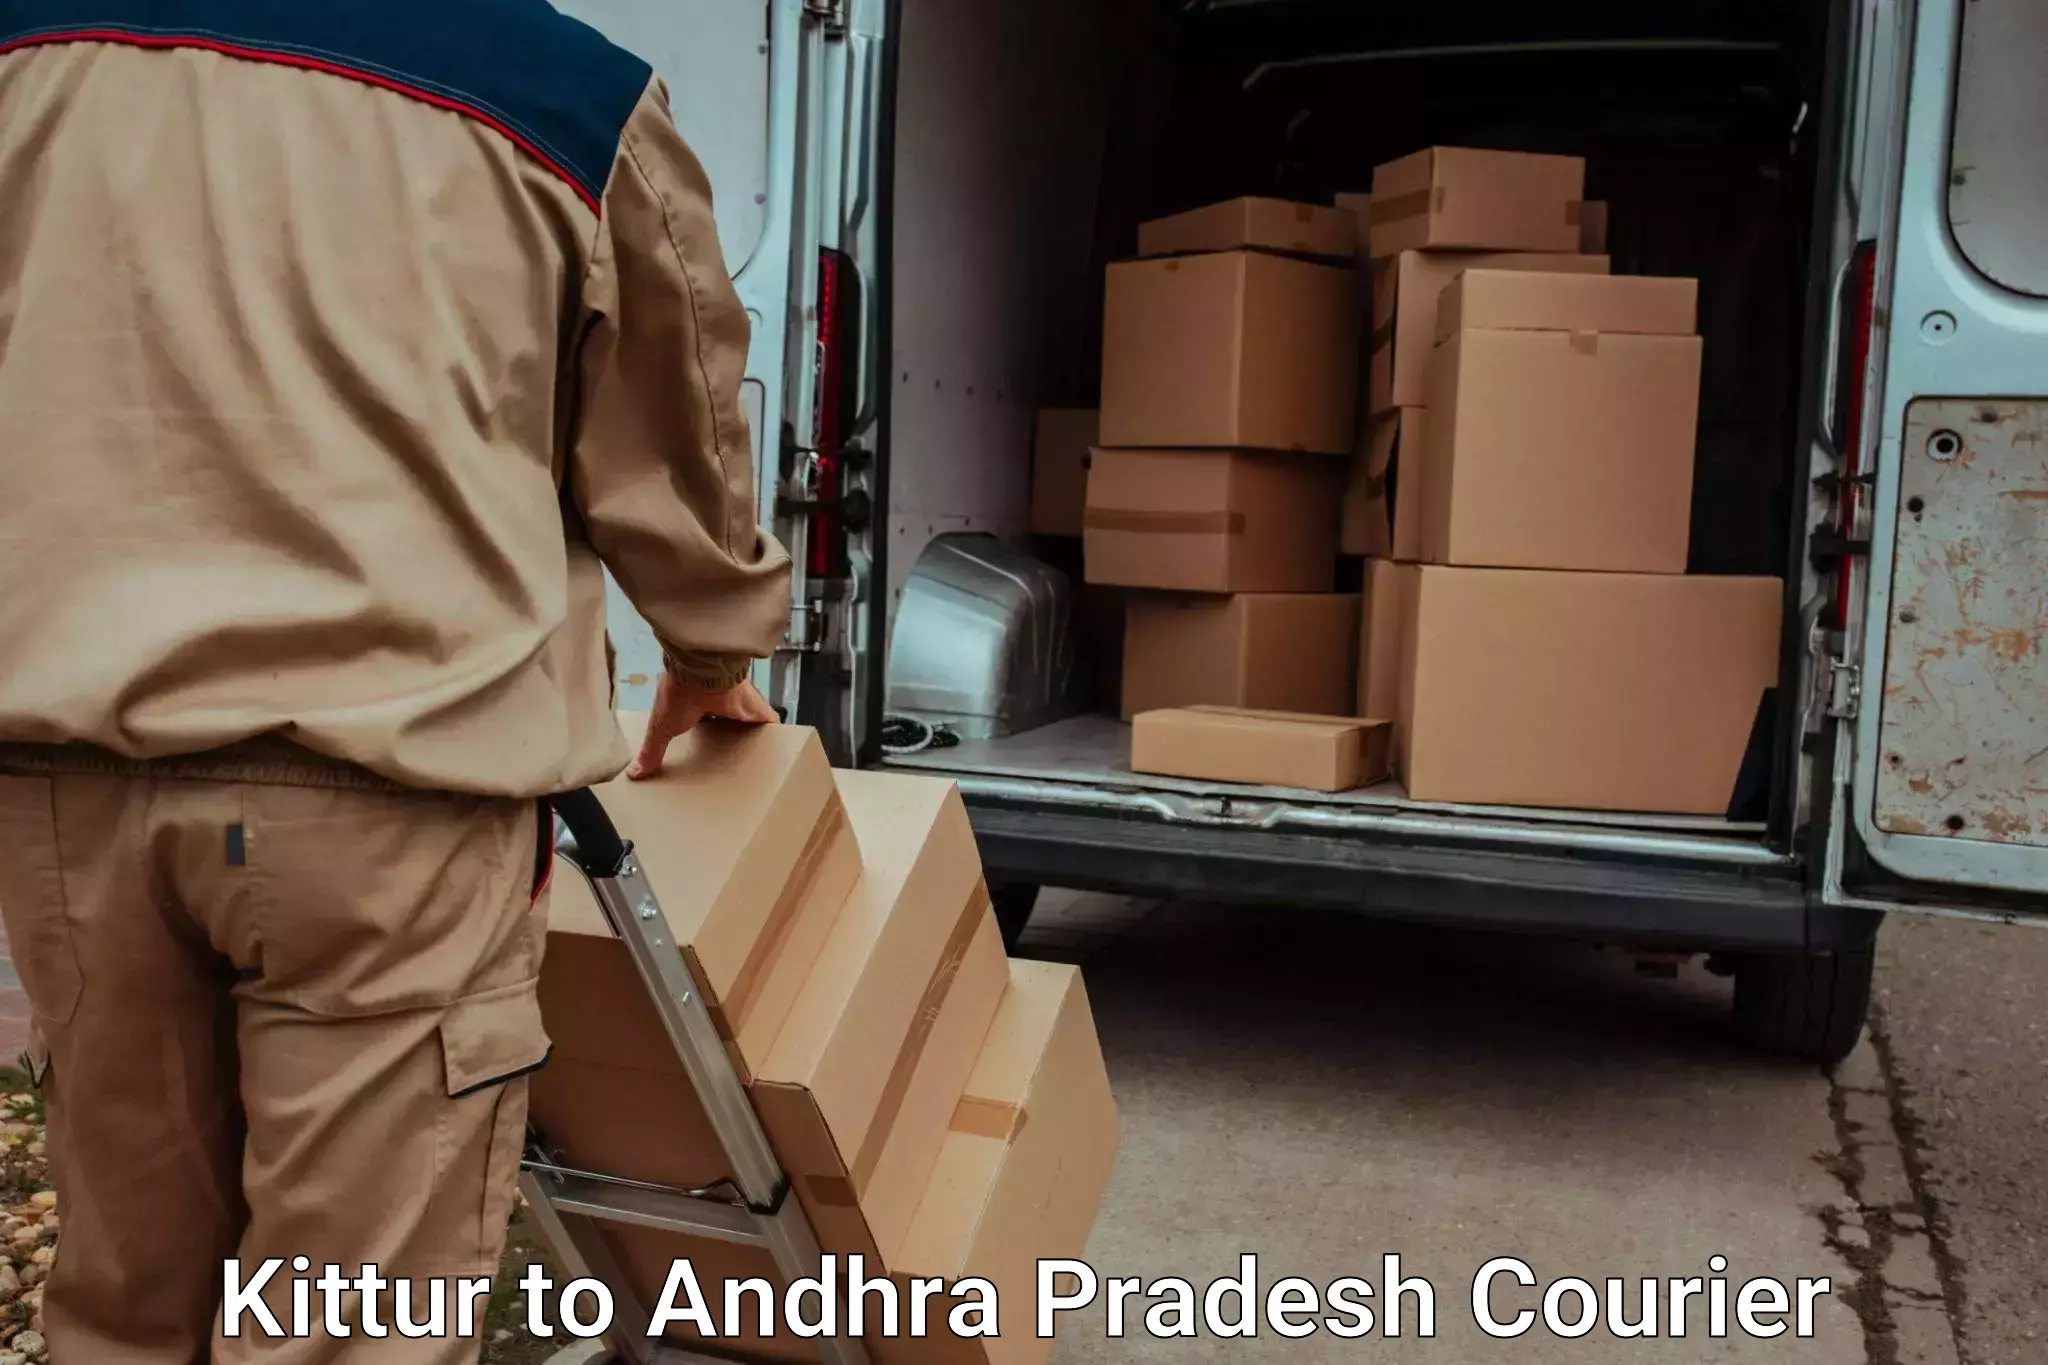 Trusted moving company Kittur to Rajam